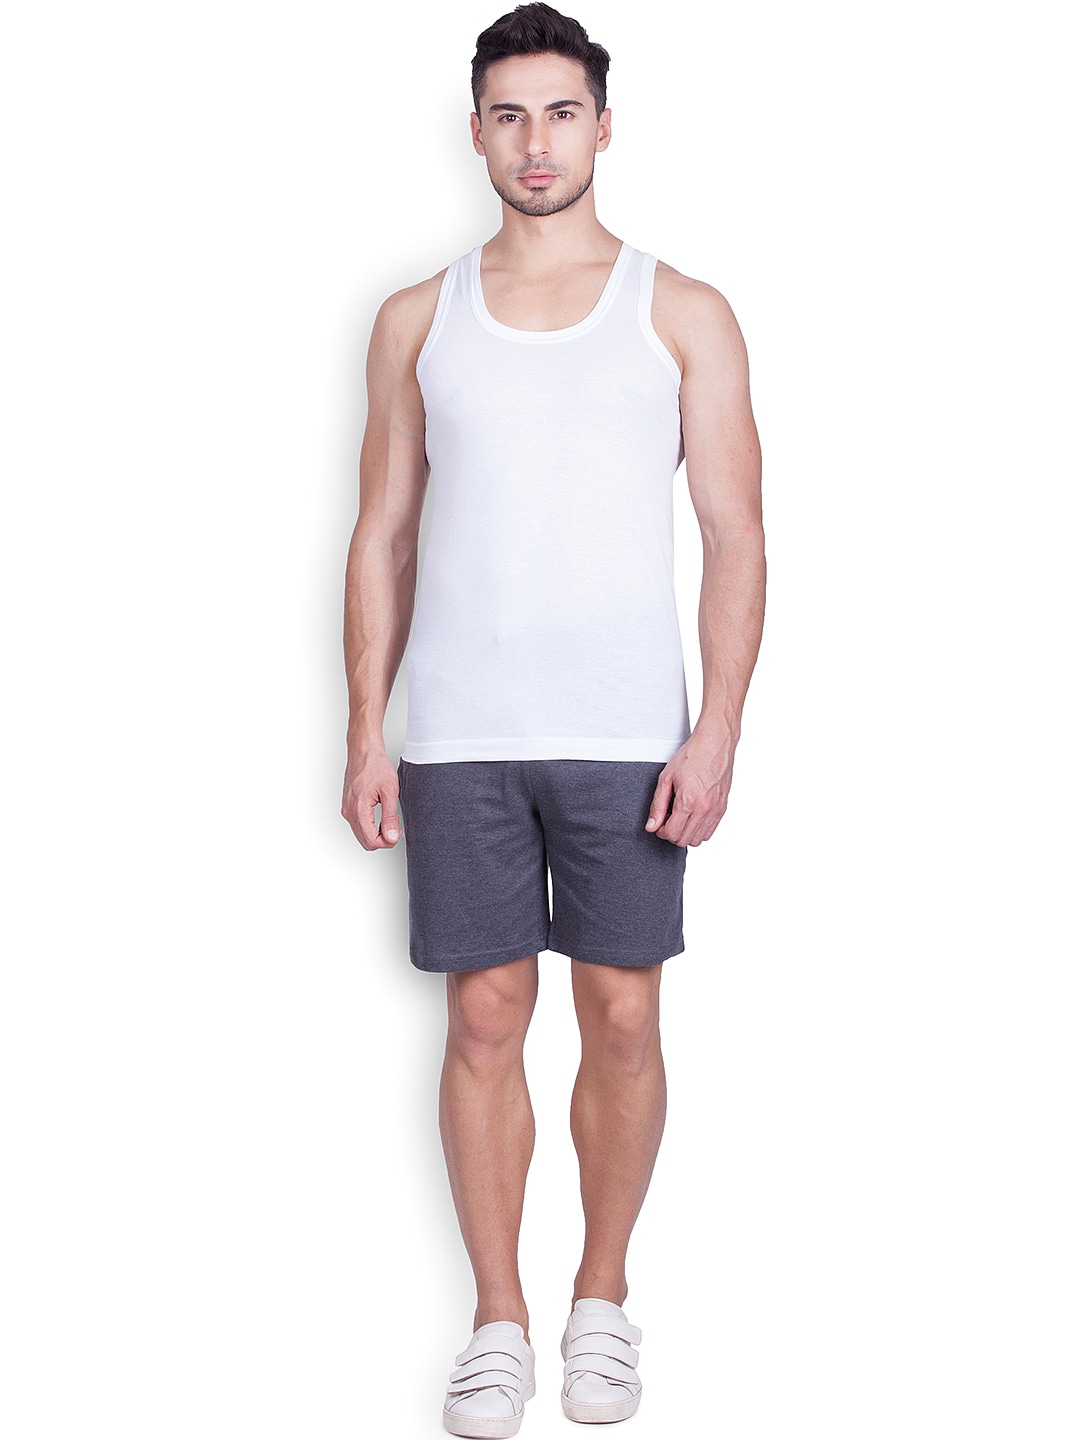 Clothing Innerwear Vests | Lux Cozi Pack of 4 Innerwear Vests COZI_GLO_WH_100 - CR02897